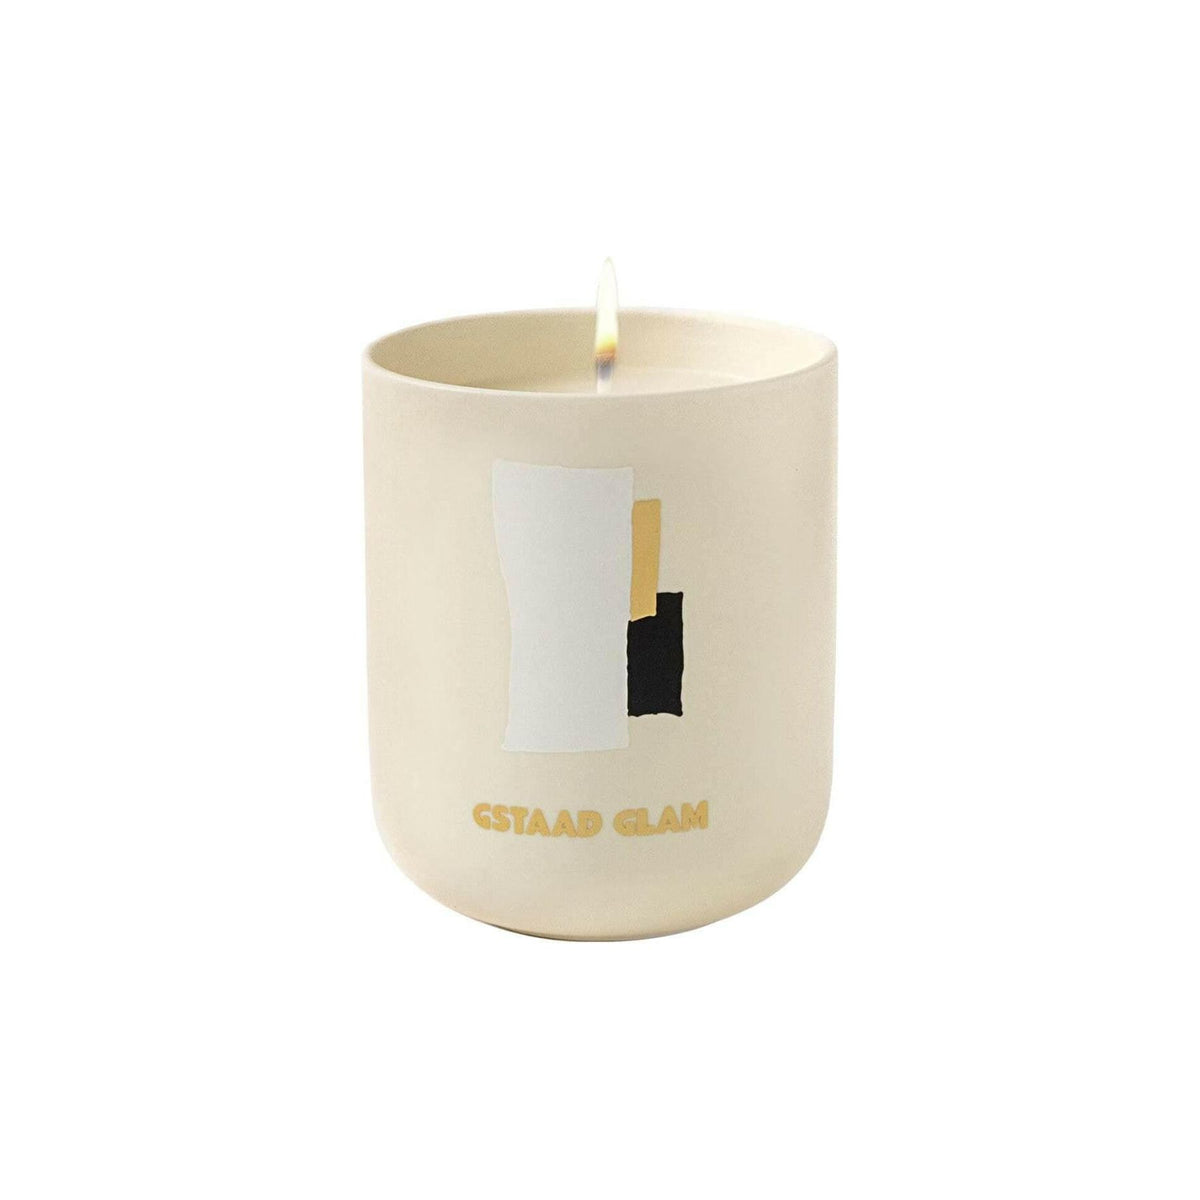 ASSOULINE - Gstaad Glam Scented Candle - JOHN JULIA